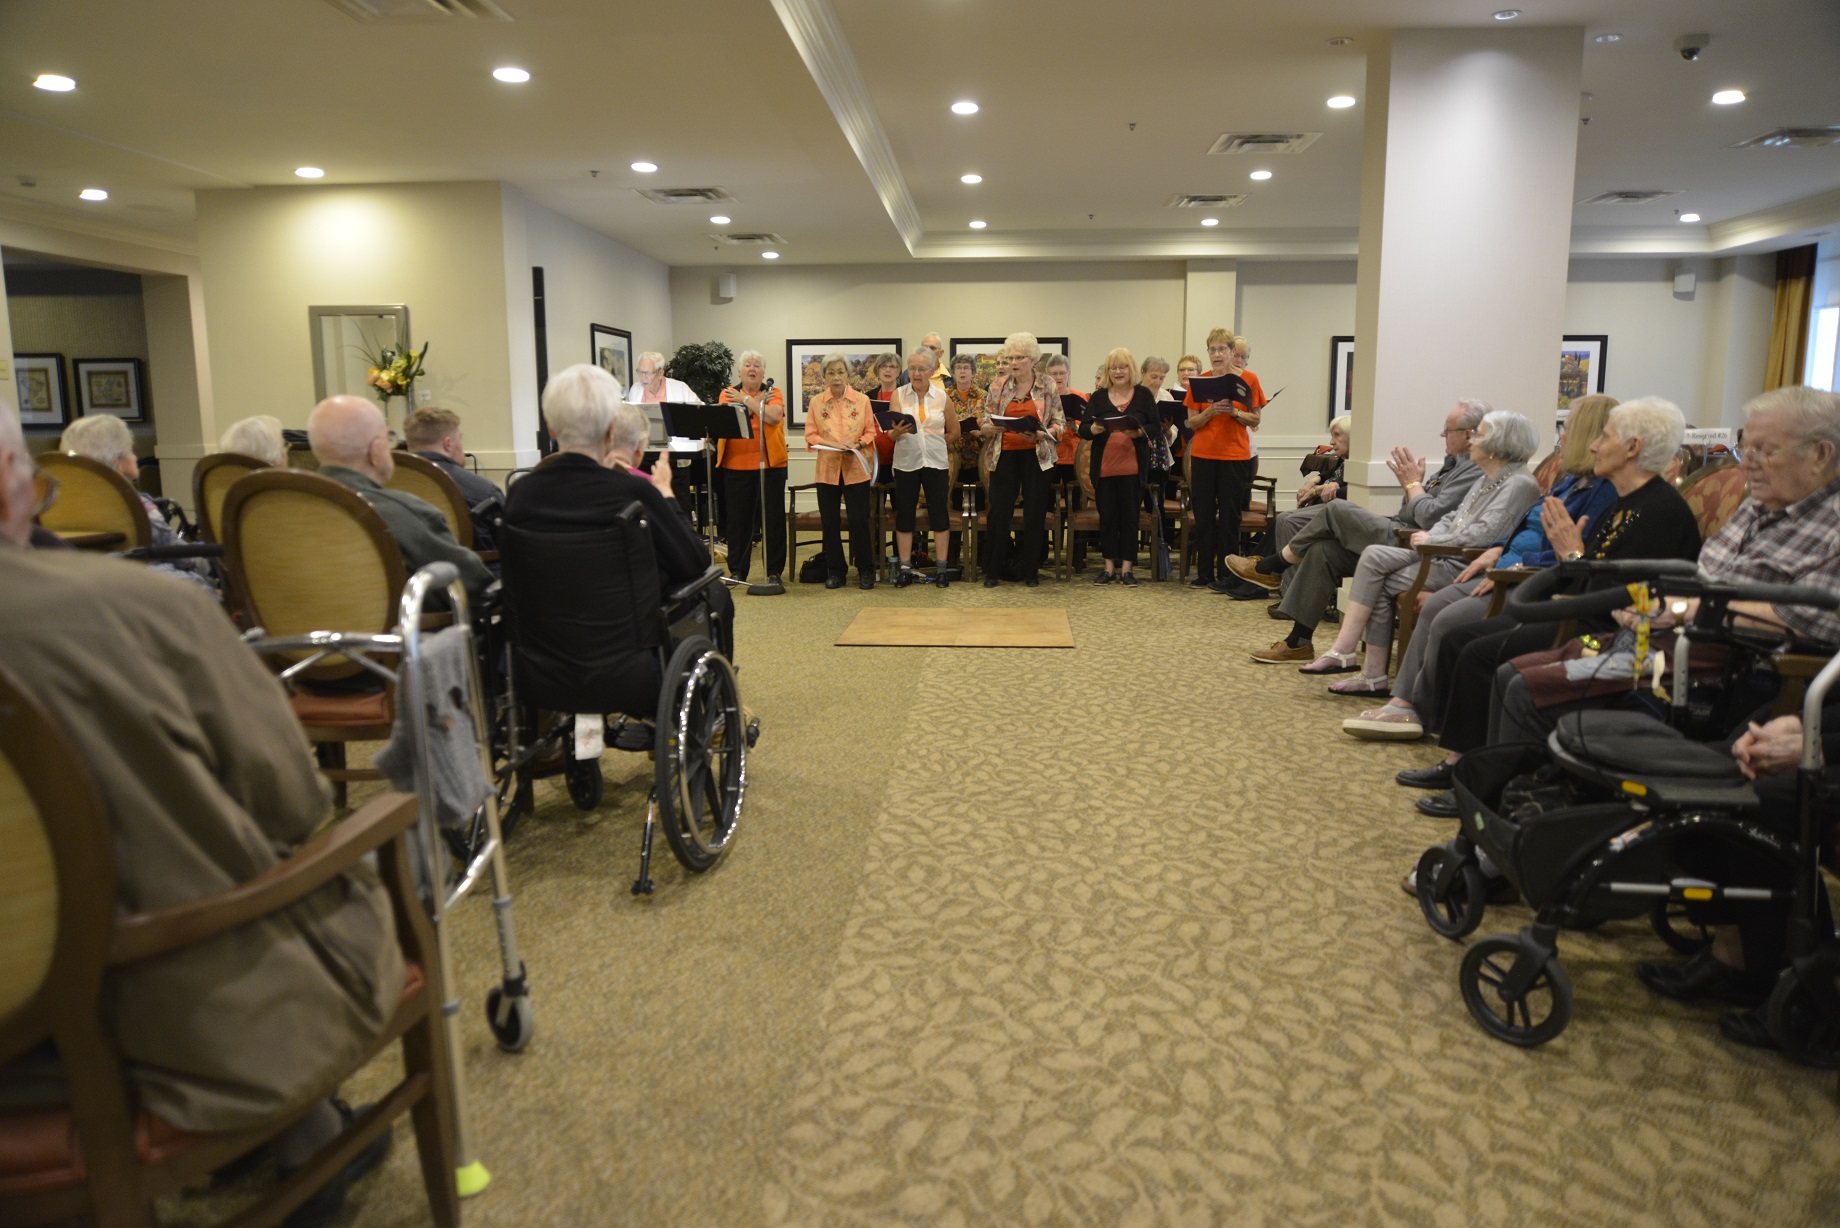 Residents of College Park II, a retirement residence, are entertained by a local choir. A landmark 2013 study by the Montreal Neurological Institute showed clearly the benefits music has on the brain. Photo by Don Hall